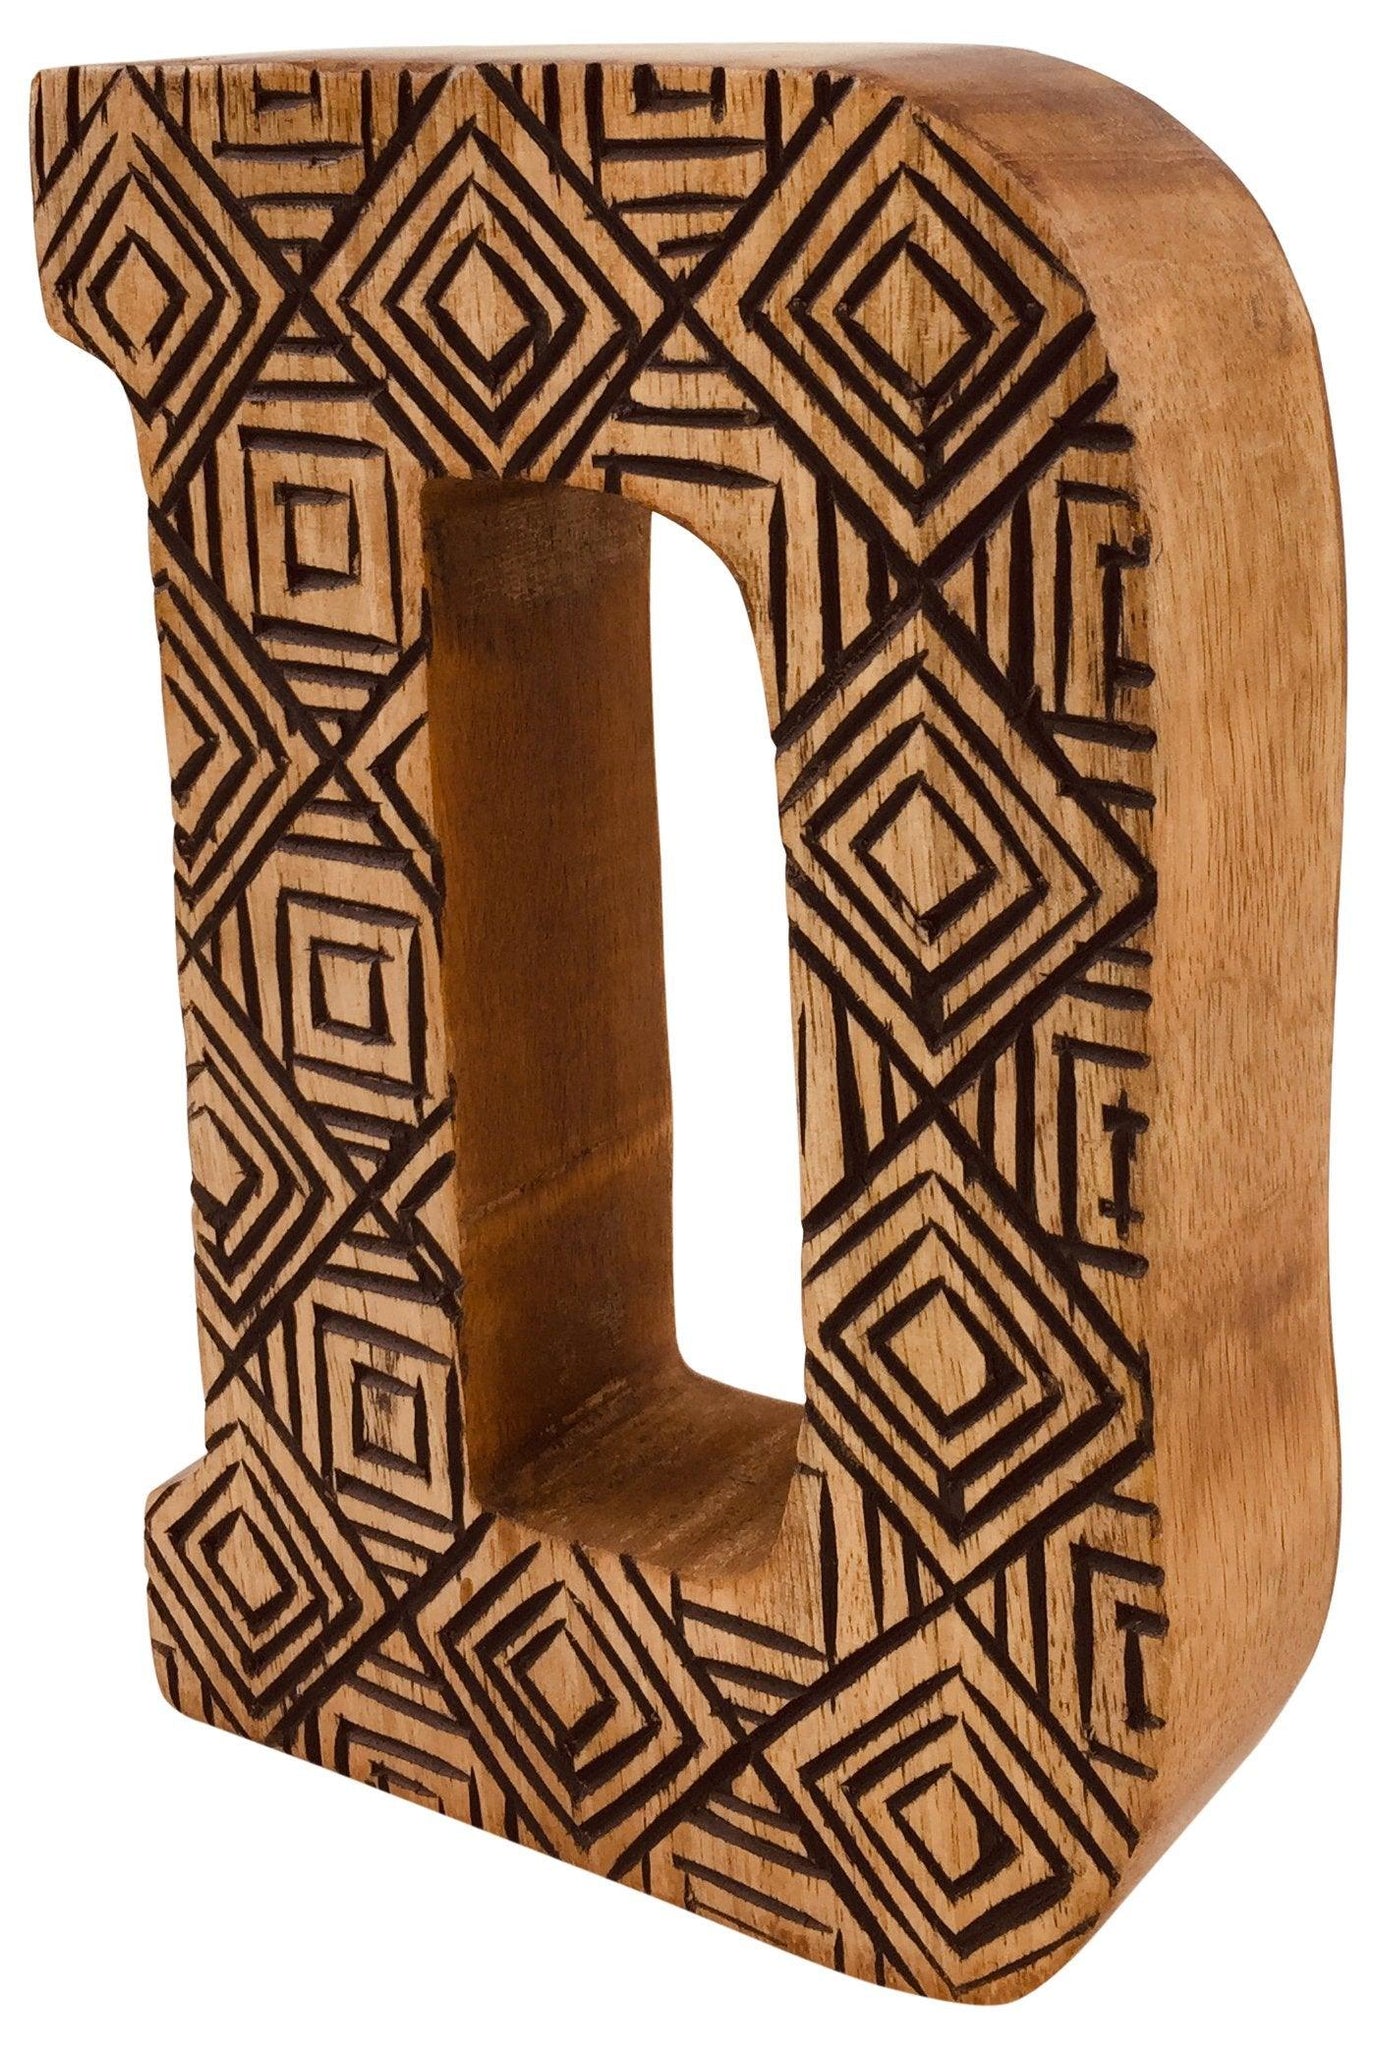 Hand Carved Wooden Geometric Letter D - £12.99 - Single Letters 